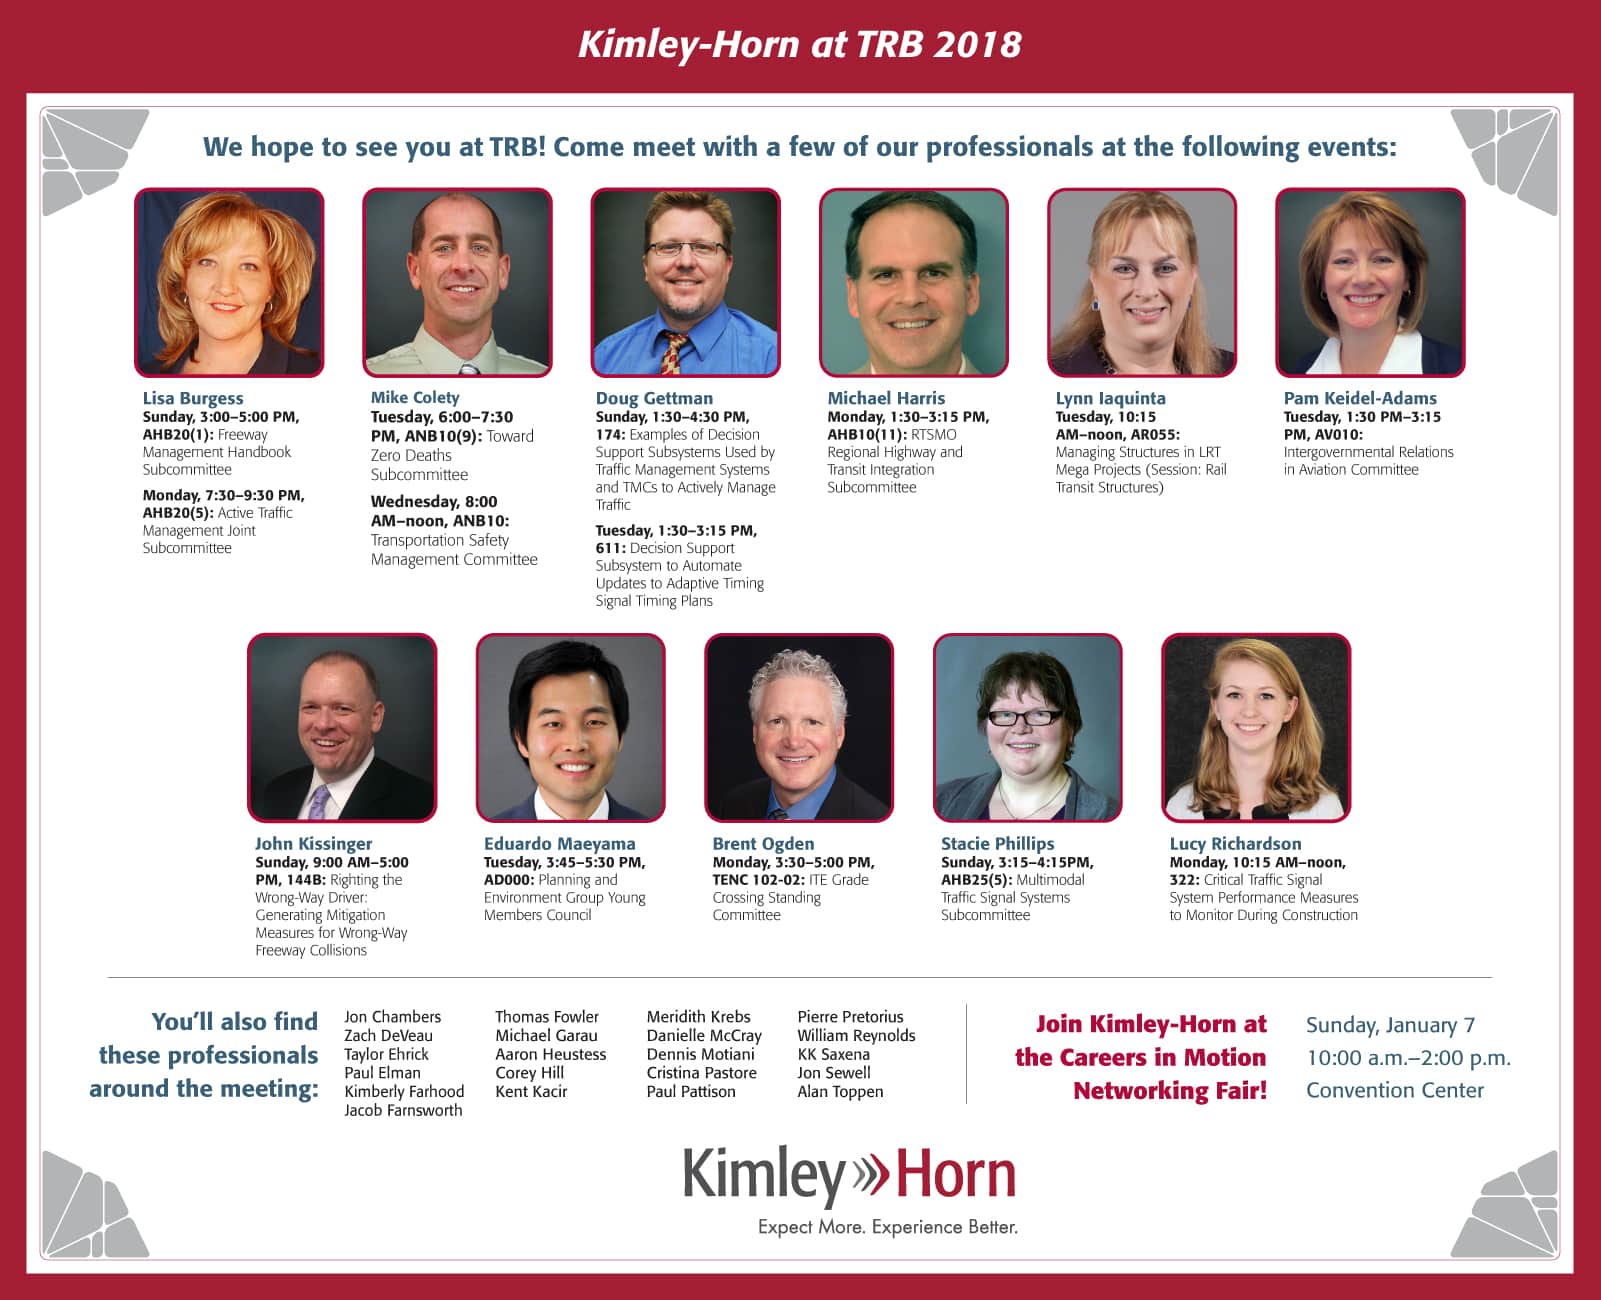 Kimley-Horn at the 2018 TRB Annual Meeting